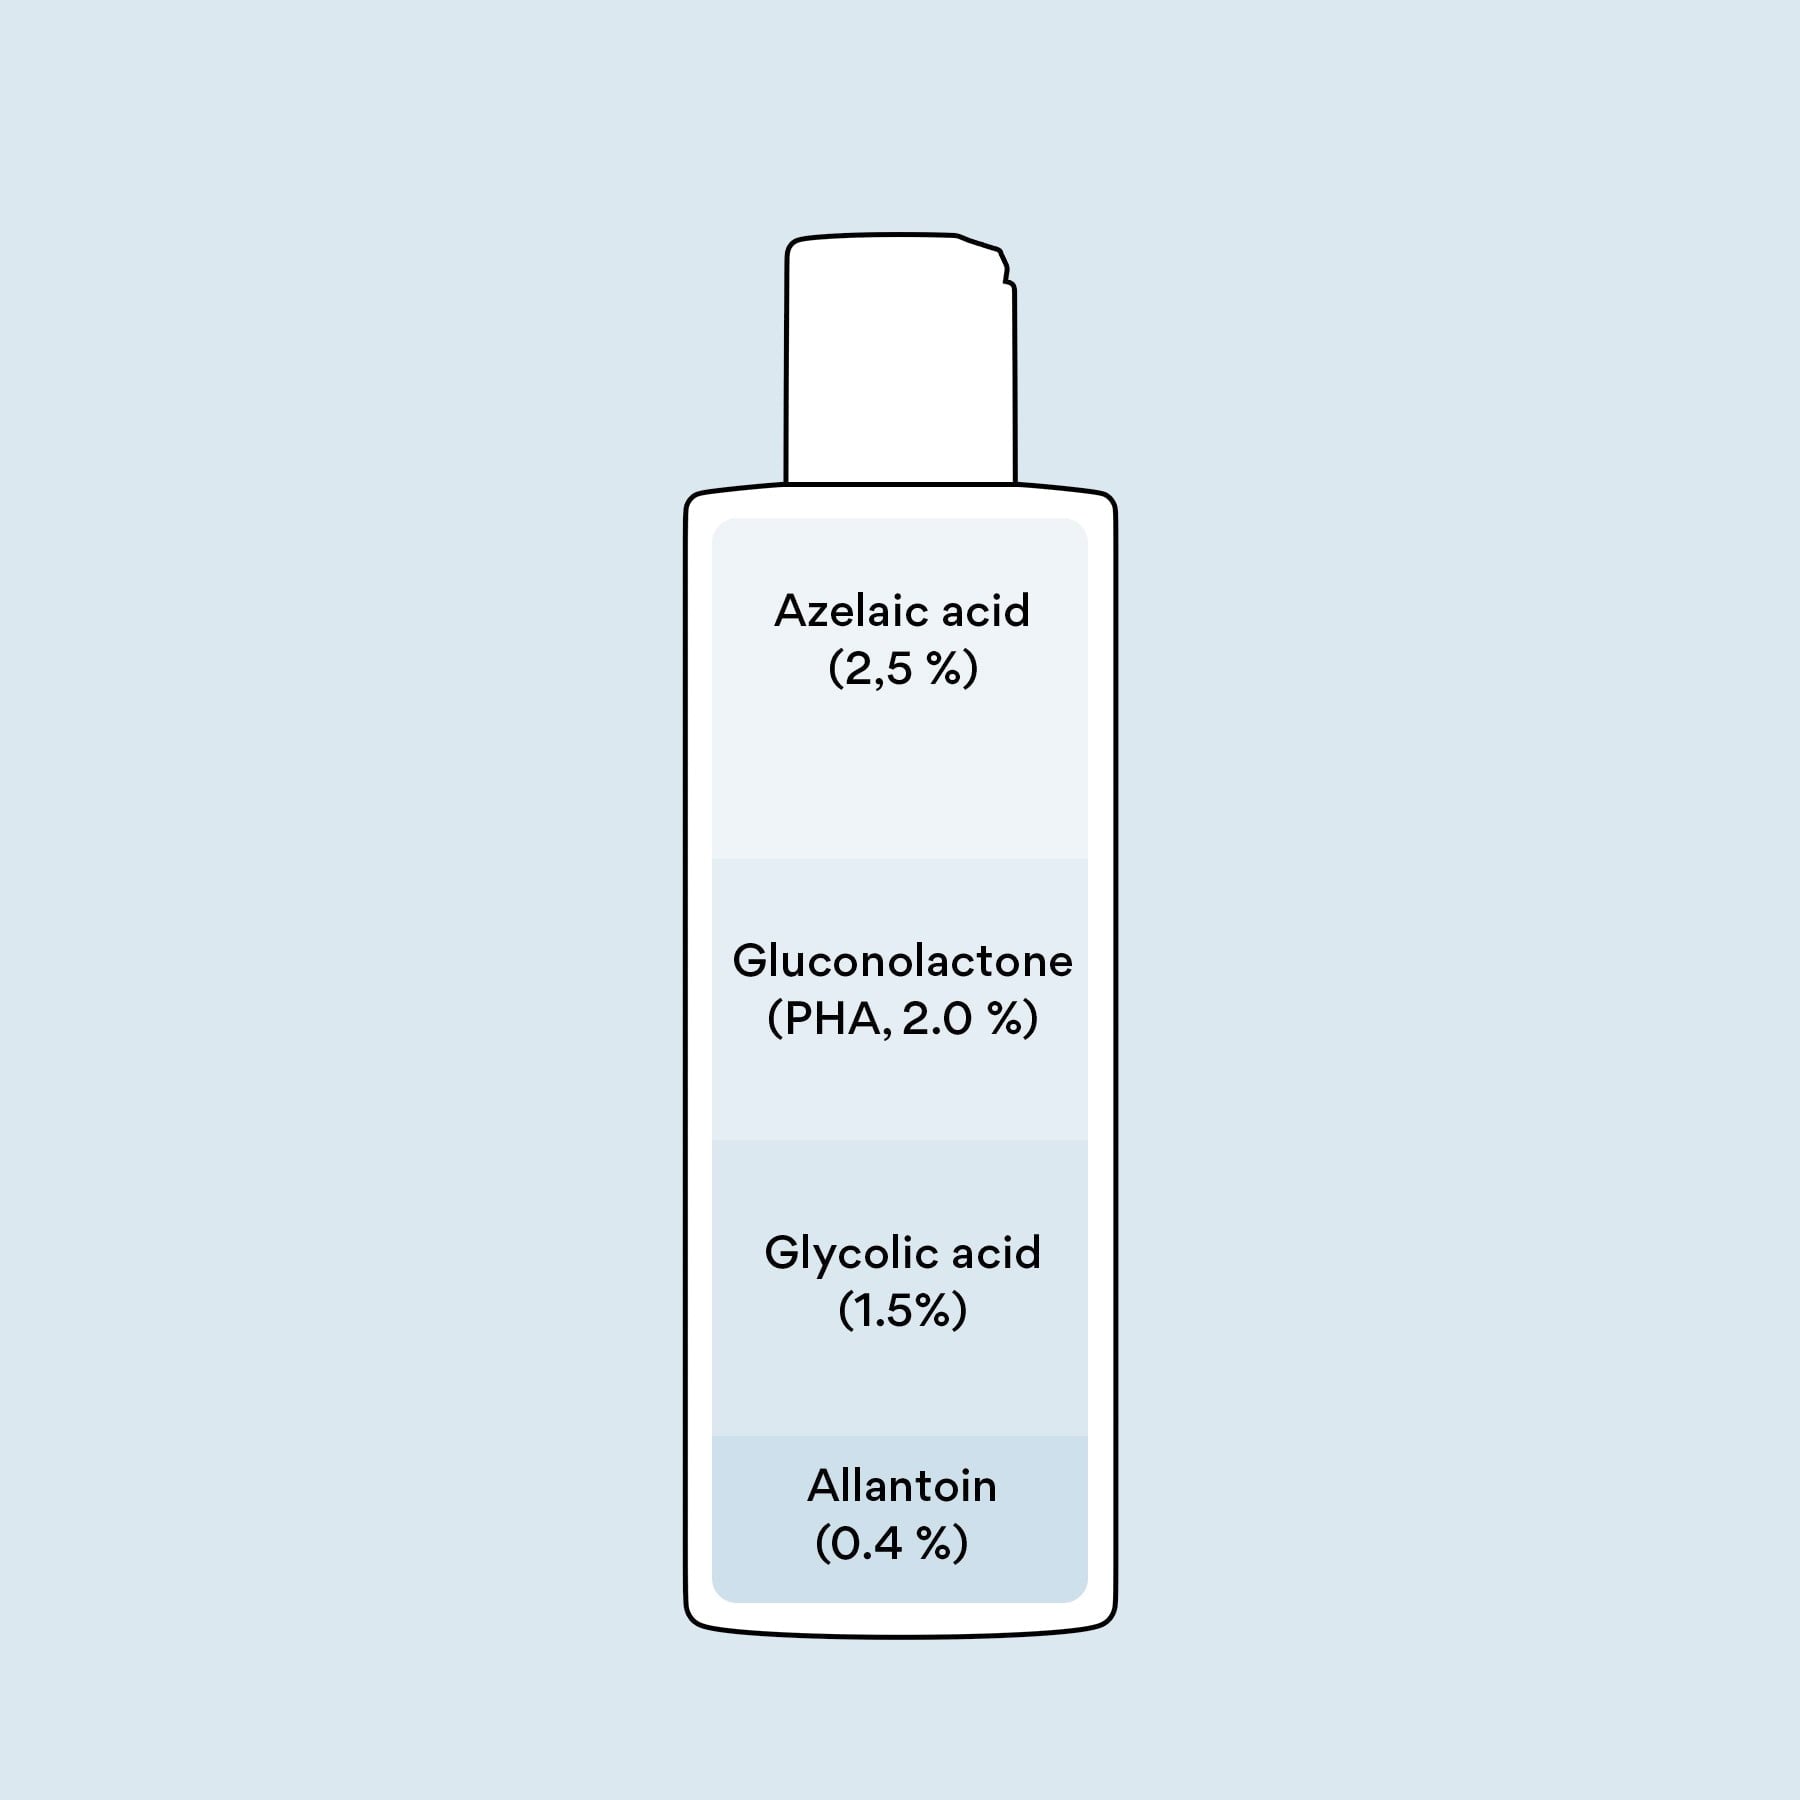 Cleanser with azelaic acid for rosacea-prone skin